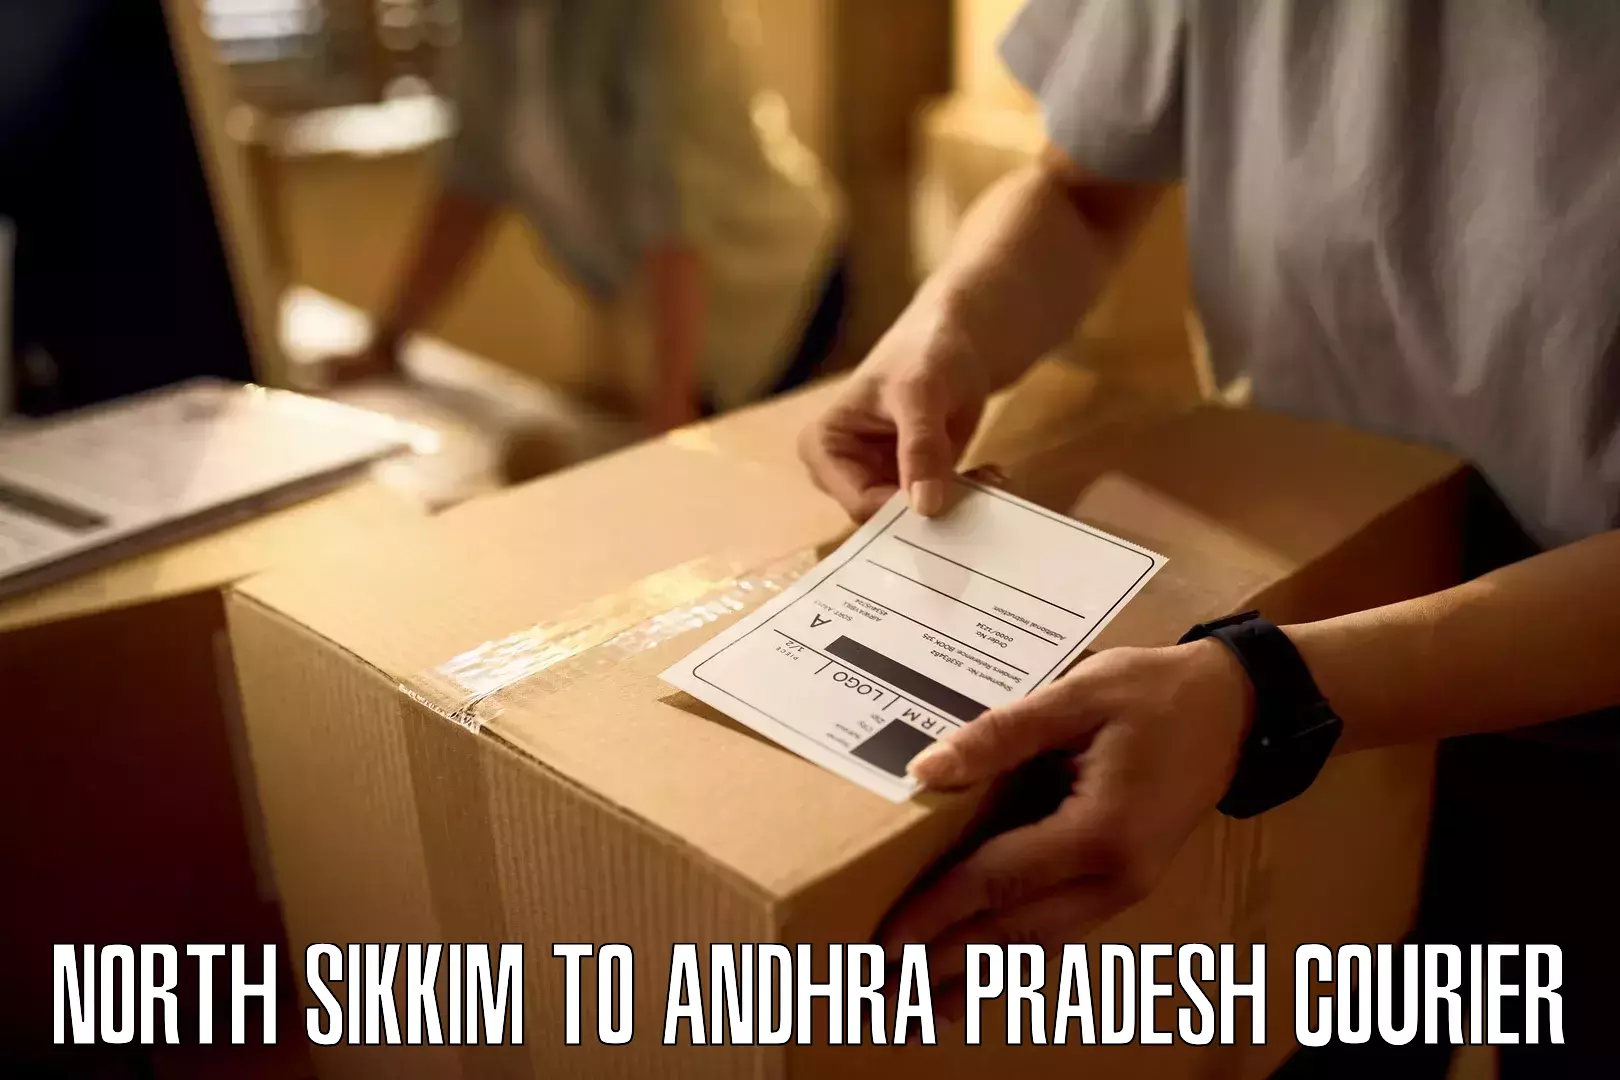 On-call courier service North Sikkim to Addateegala